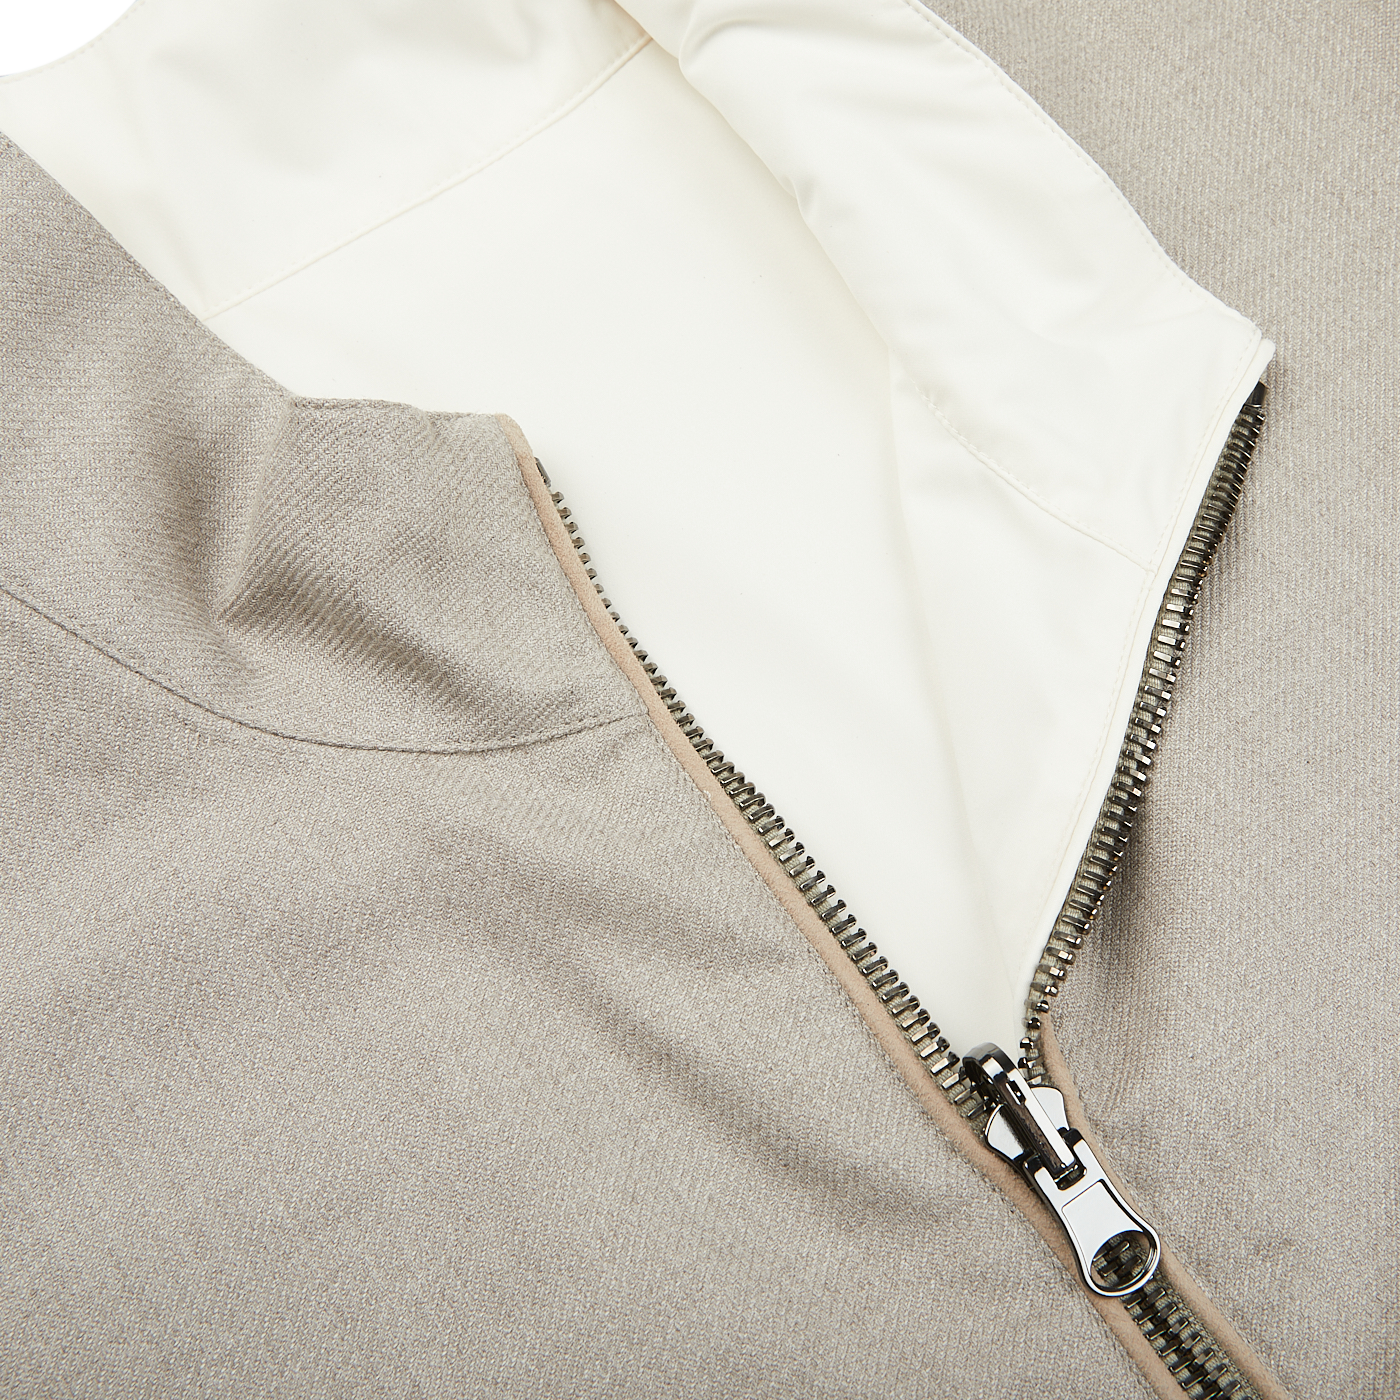 A weather-resistant Manto beige jacket with a zipper.